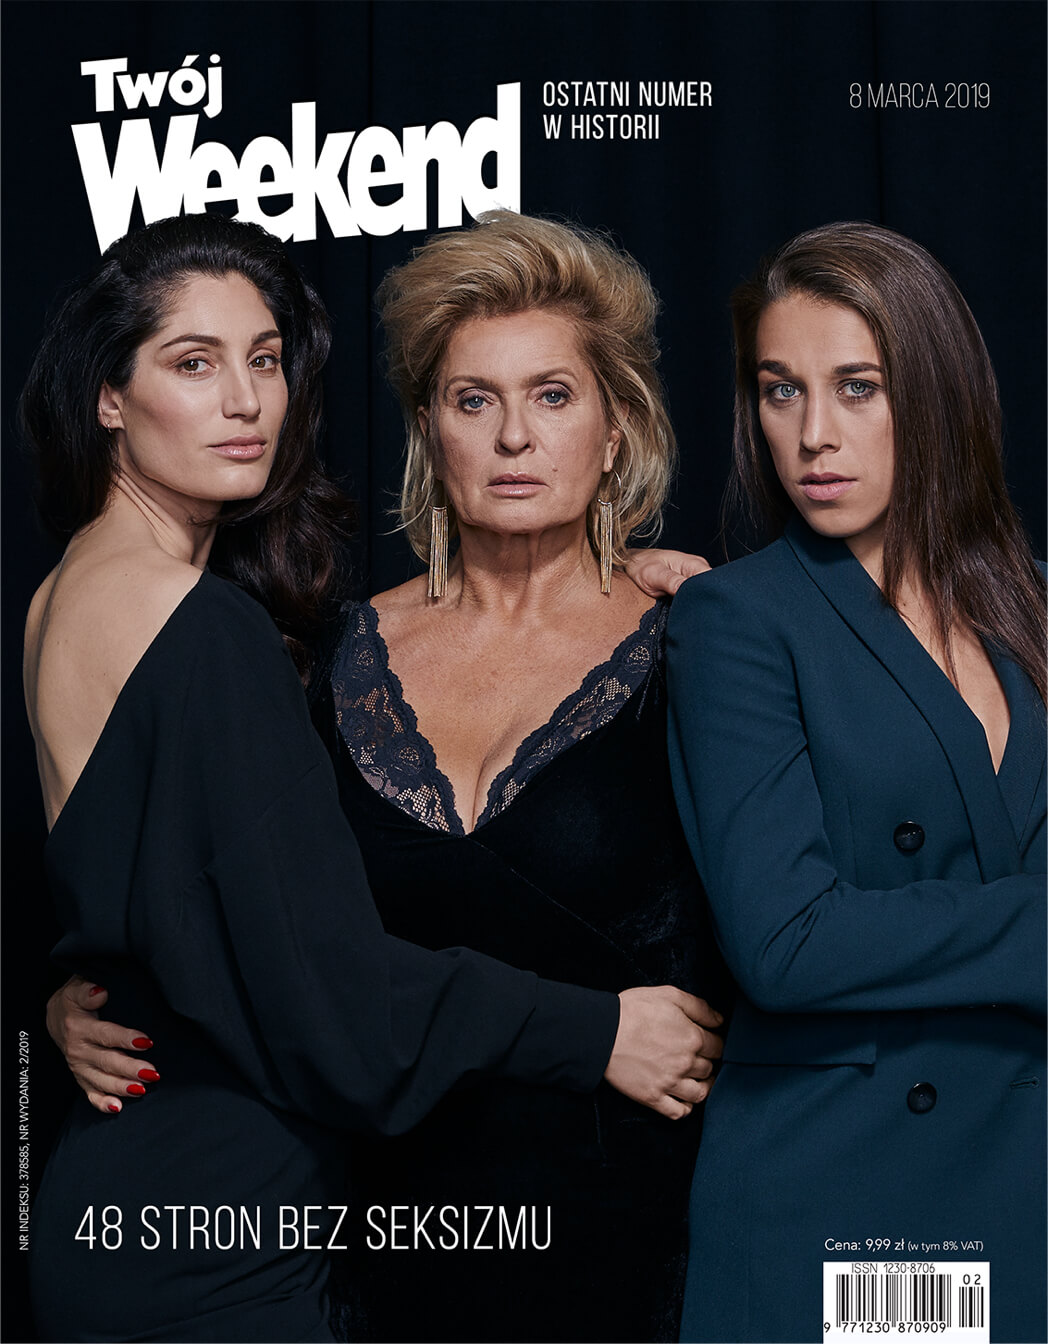 The Women’s Issue, cover